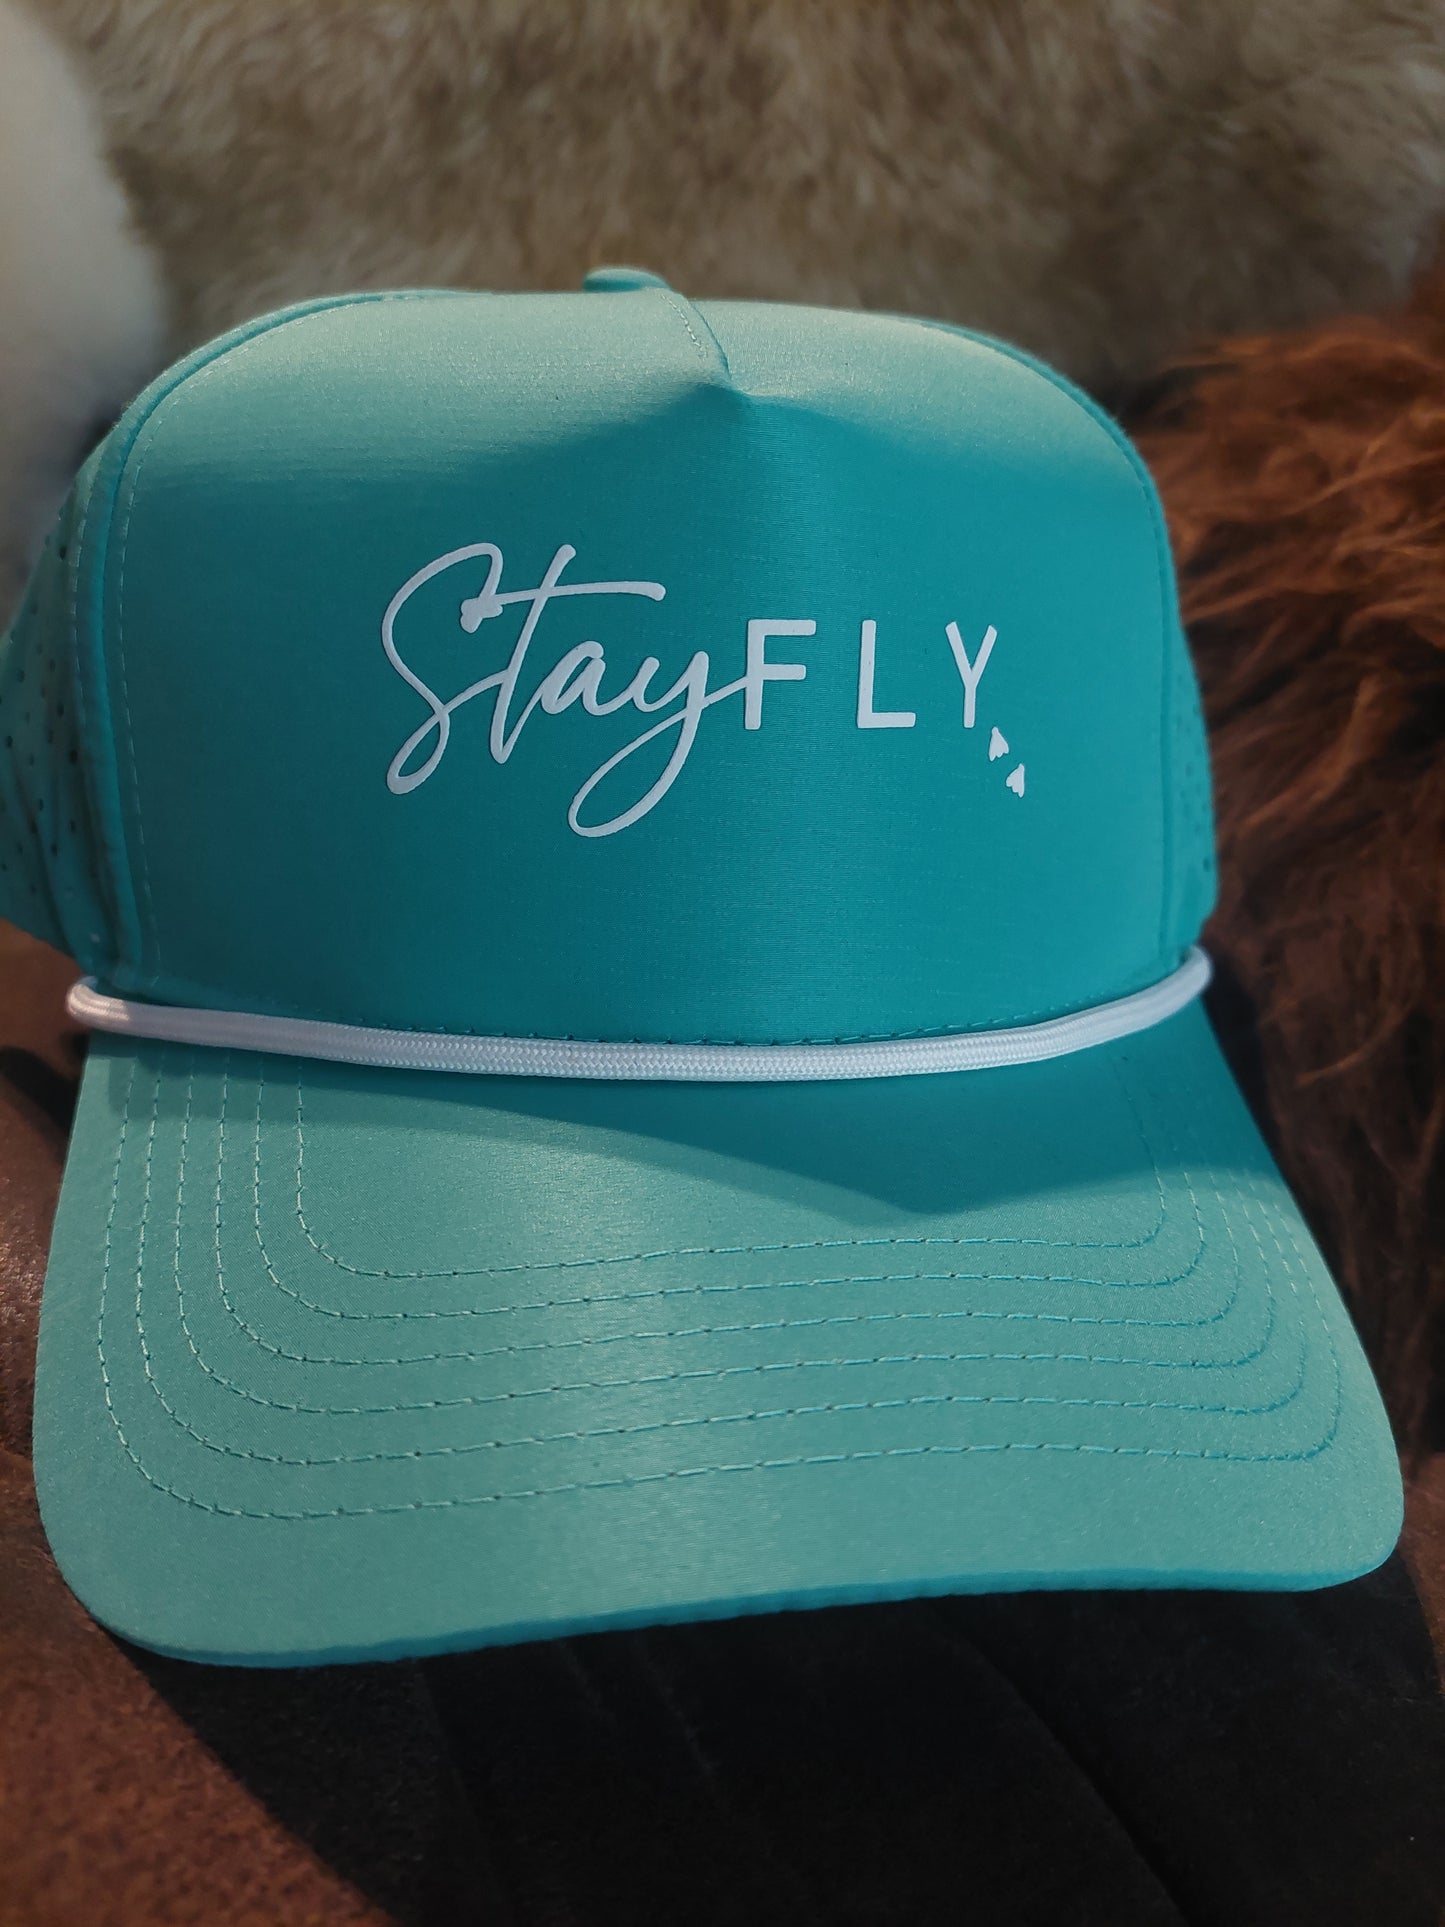 Stay Fly Cap - Turquoise